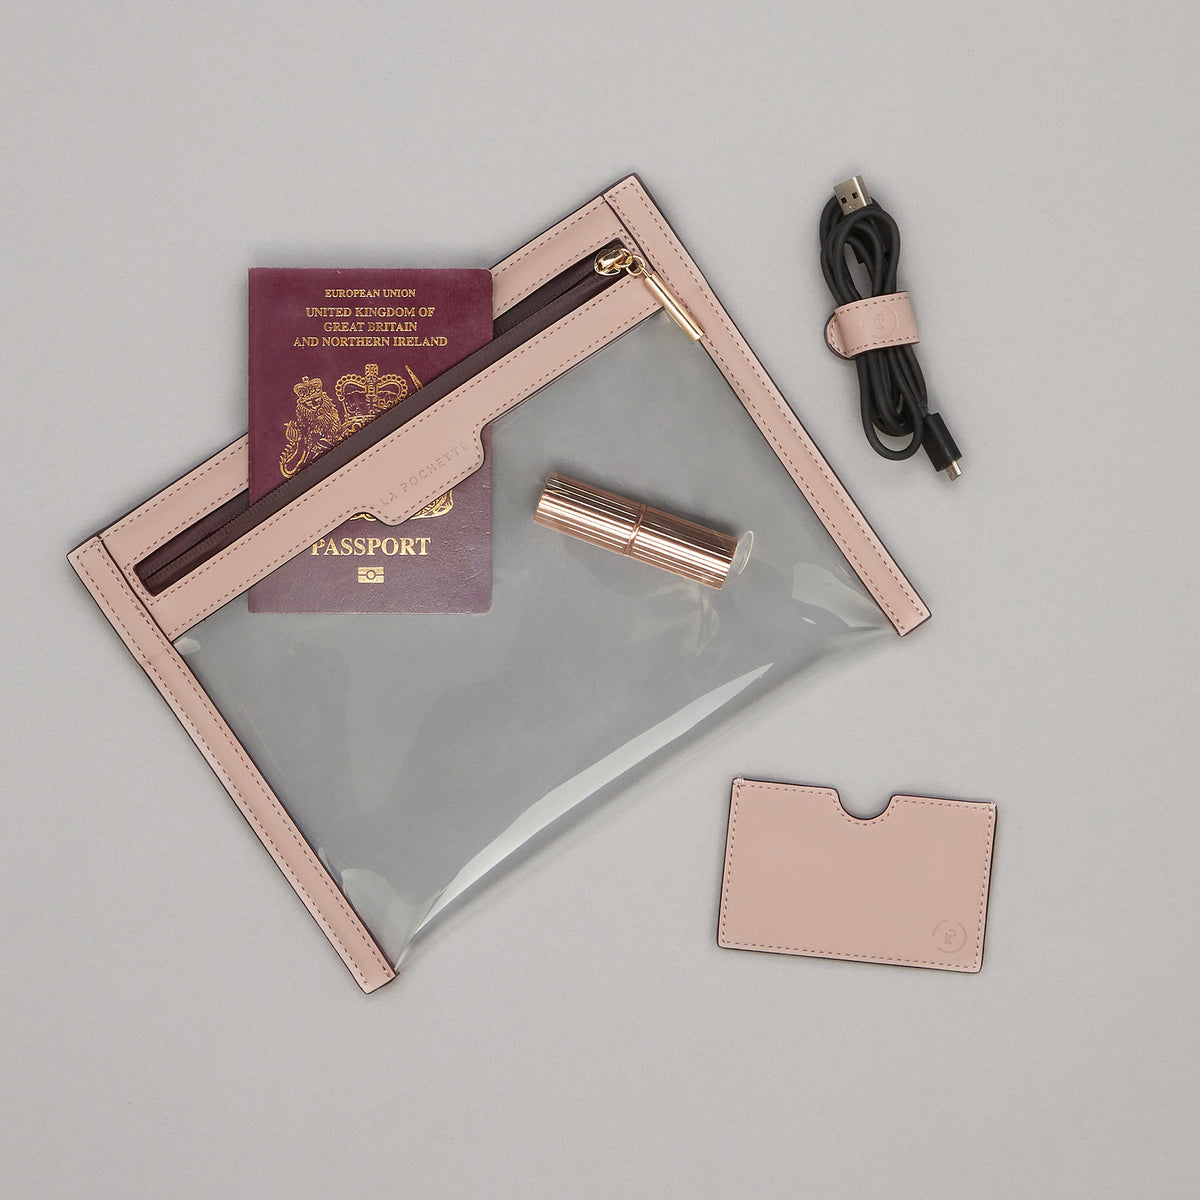 Anywhere Everywhere Wallet in Oxblood Rose colourway containing passport